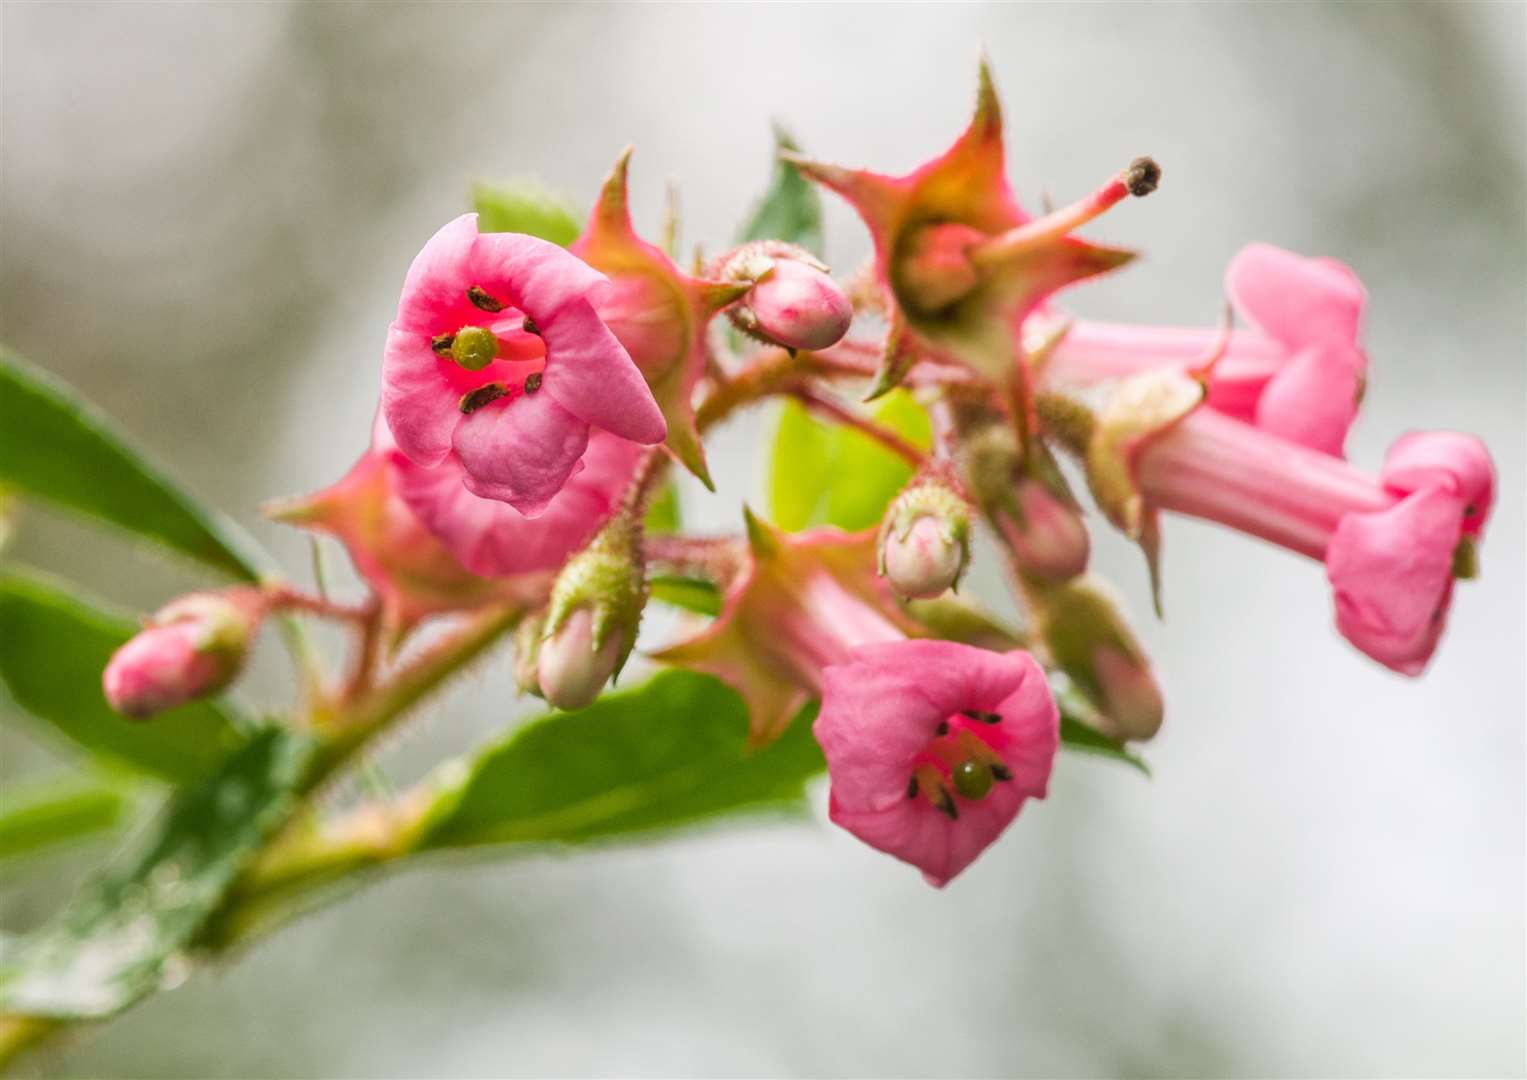 A close-up of some pink escallonia flowers. Photo credit: iStock.